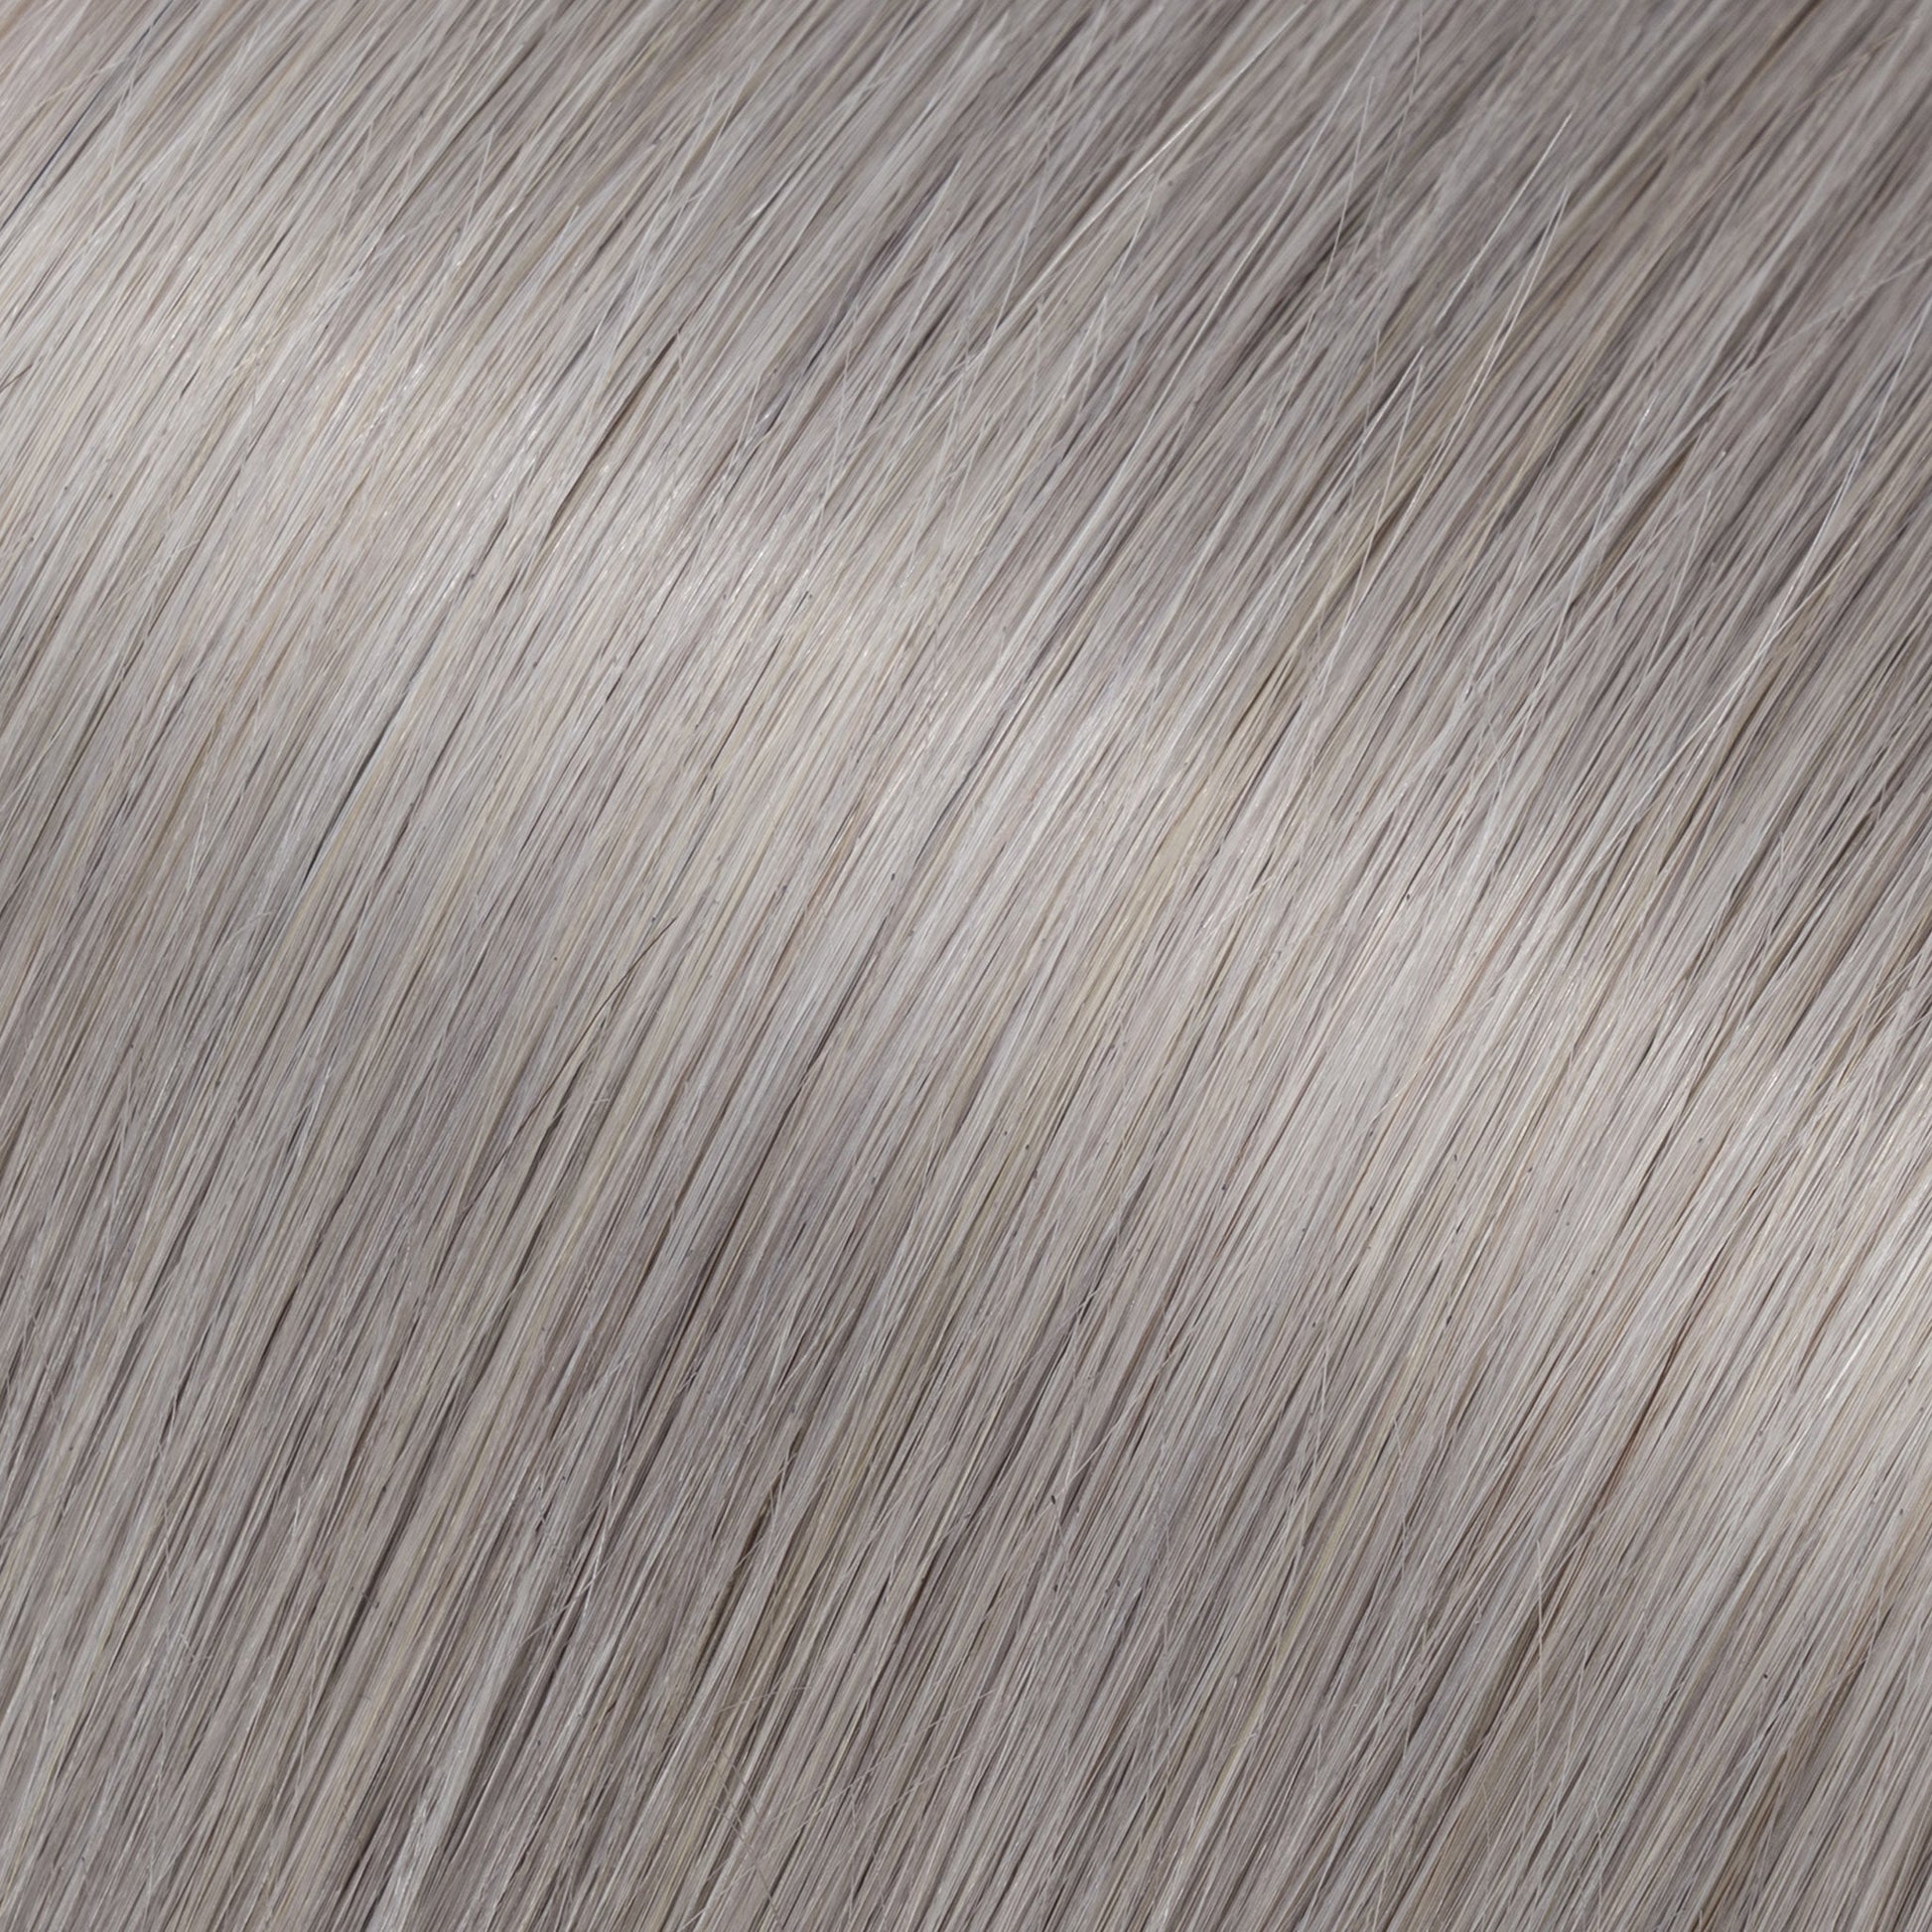 Grey Color Tape in Hair Extensions Invisible Weft 10 PCS segohair.com